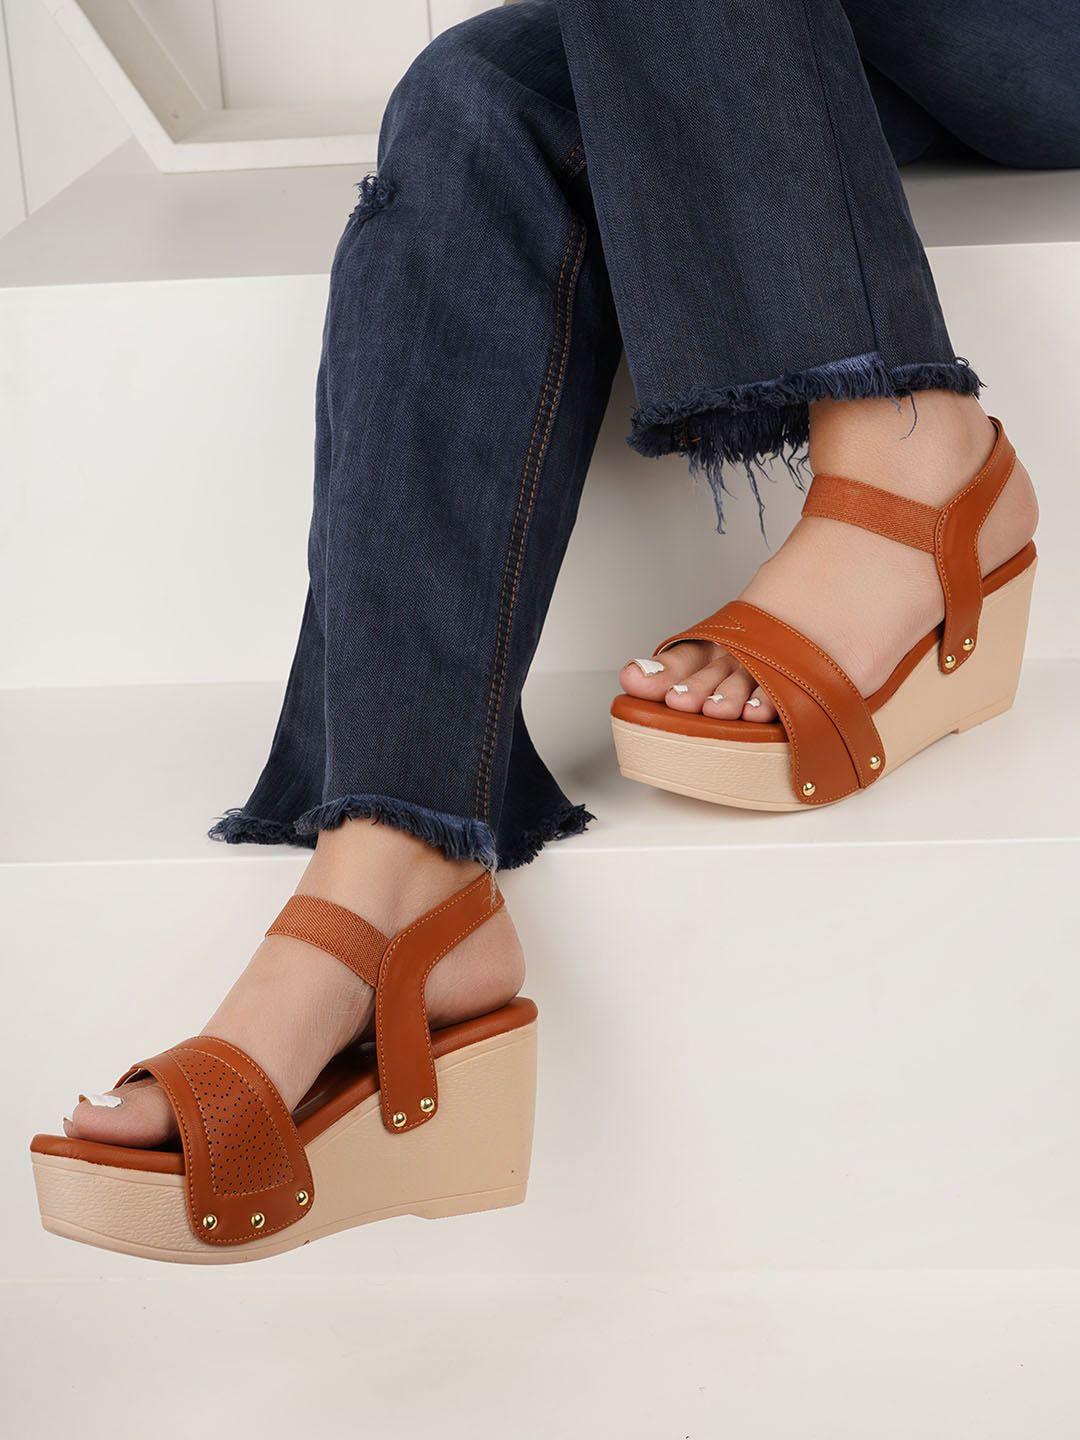 the roadster lifestyle co. tan brown open toe wedges with backstrap